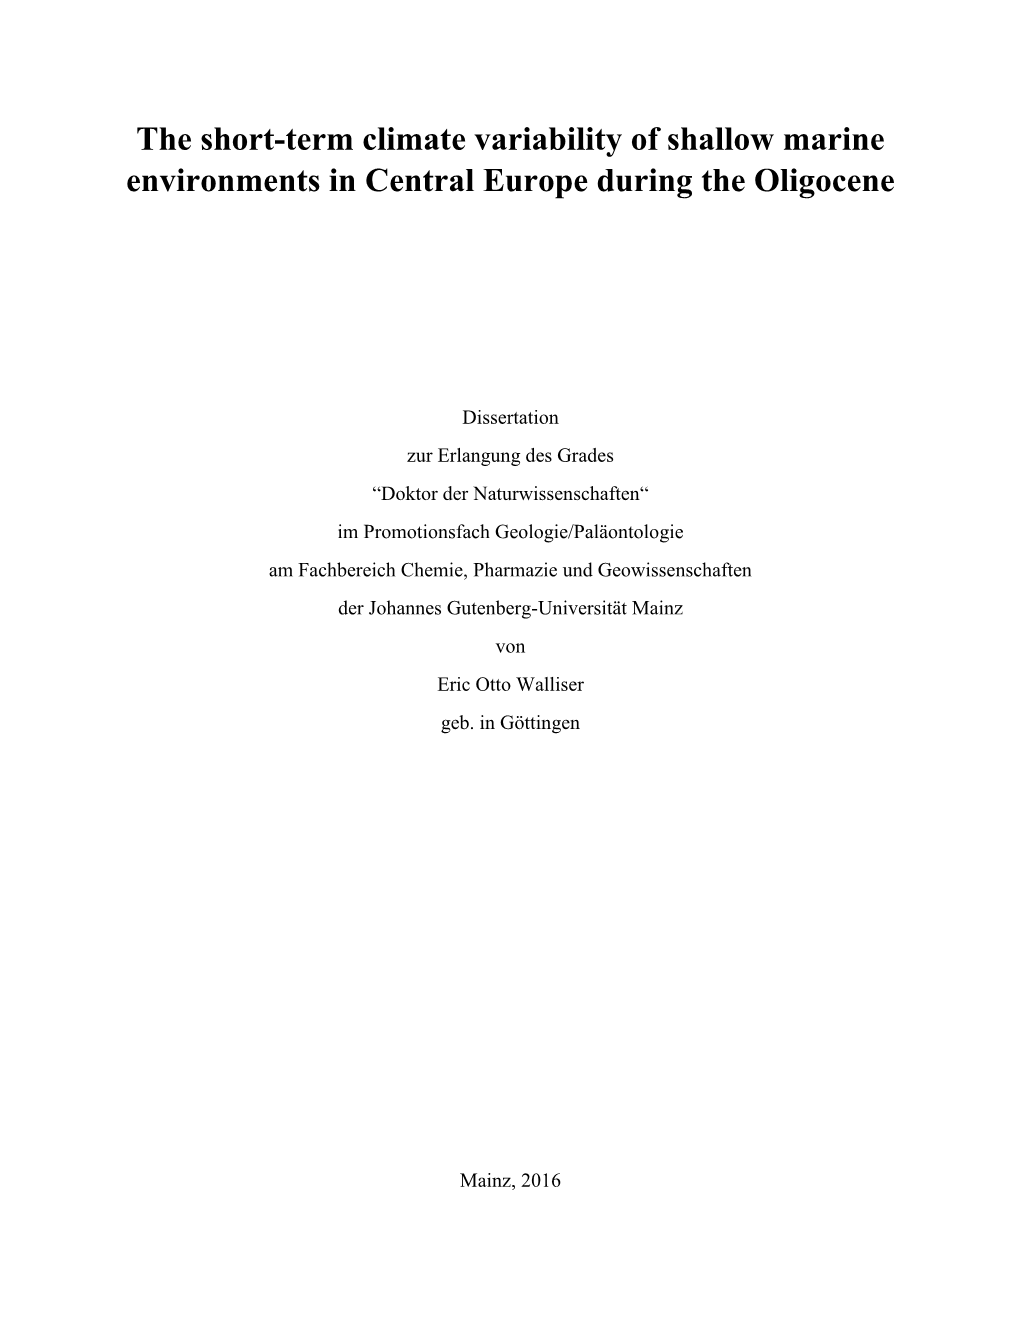 The Short-Term Climate Variability of Shallow Marine Environments in Central Europe During the Oligocene